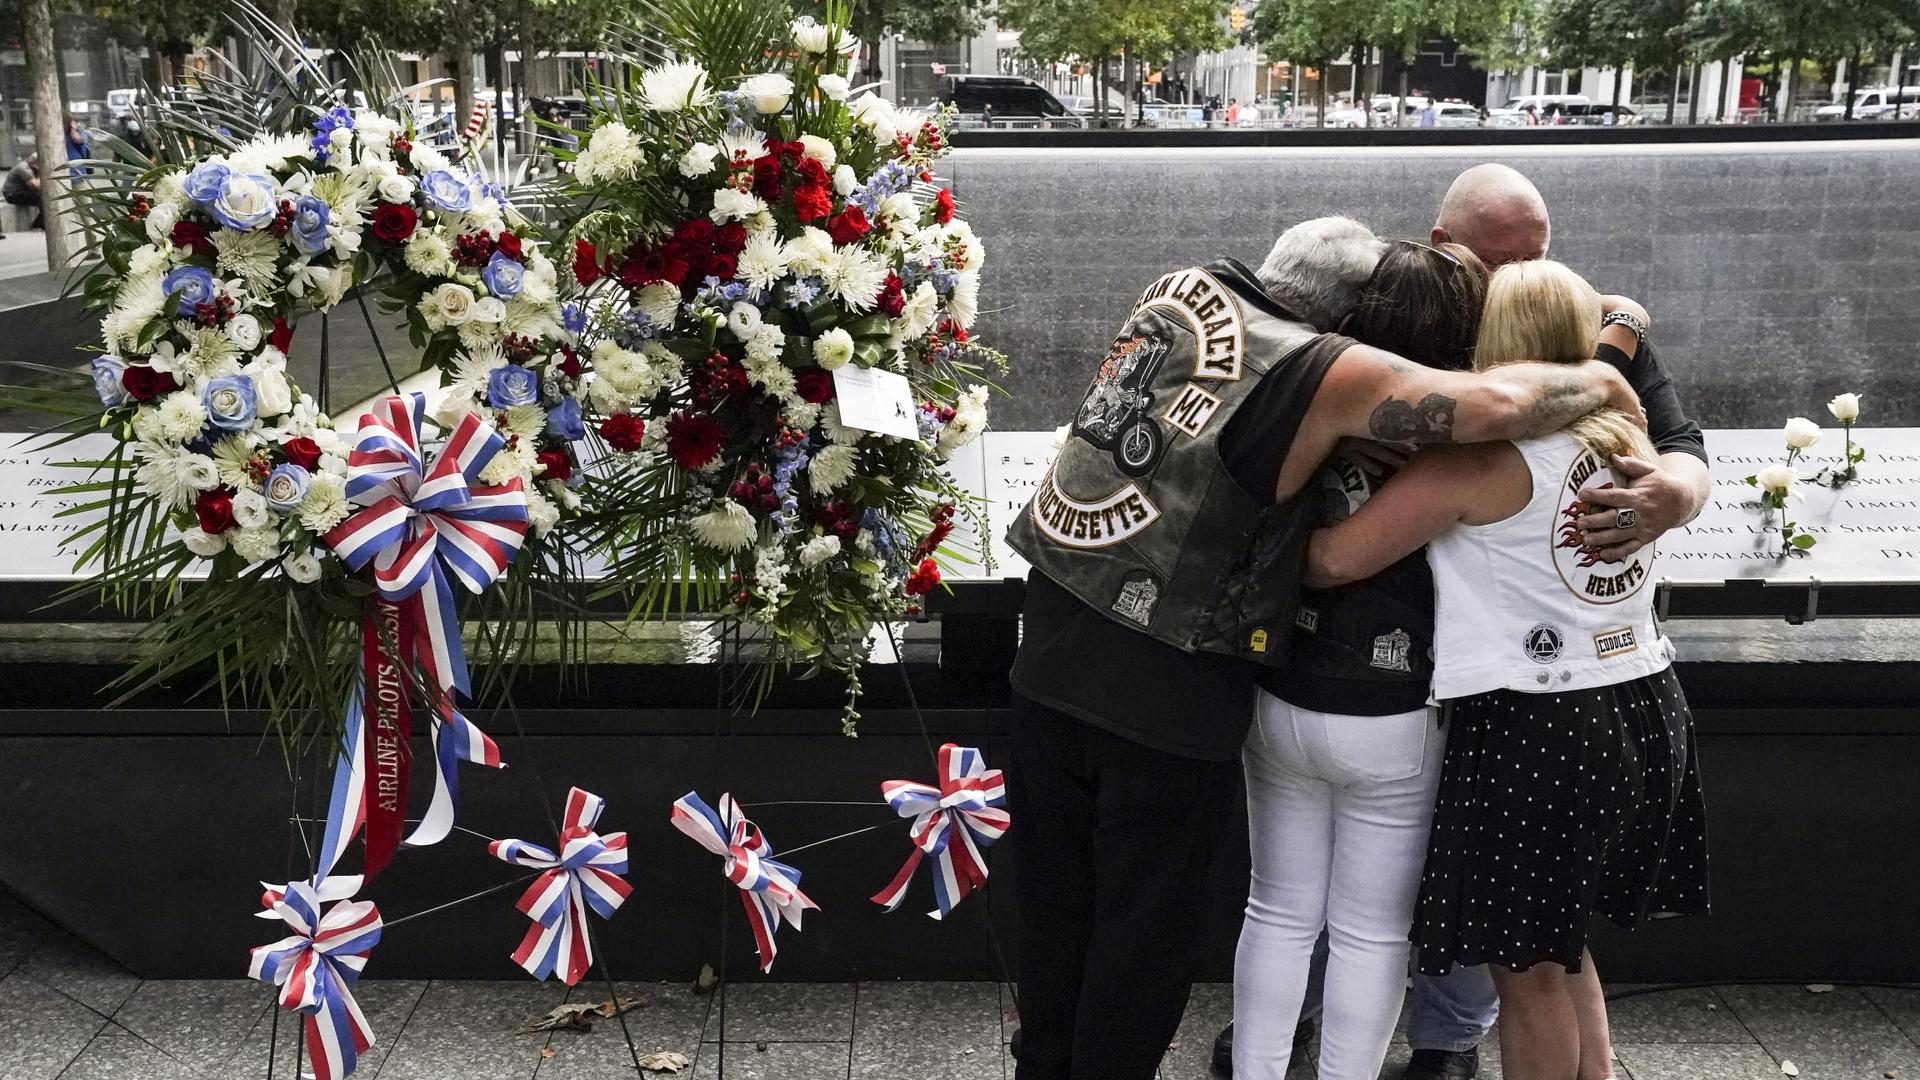 Mourners hug beside the names of the deceased Jesus Sanchez and Marianne MacFarlane at the National September 11 Memorial and Museum, Sept. 11, 2020, in New York.